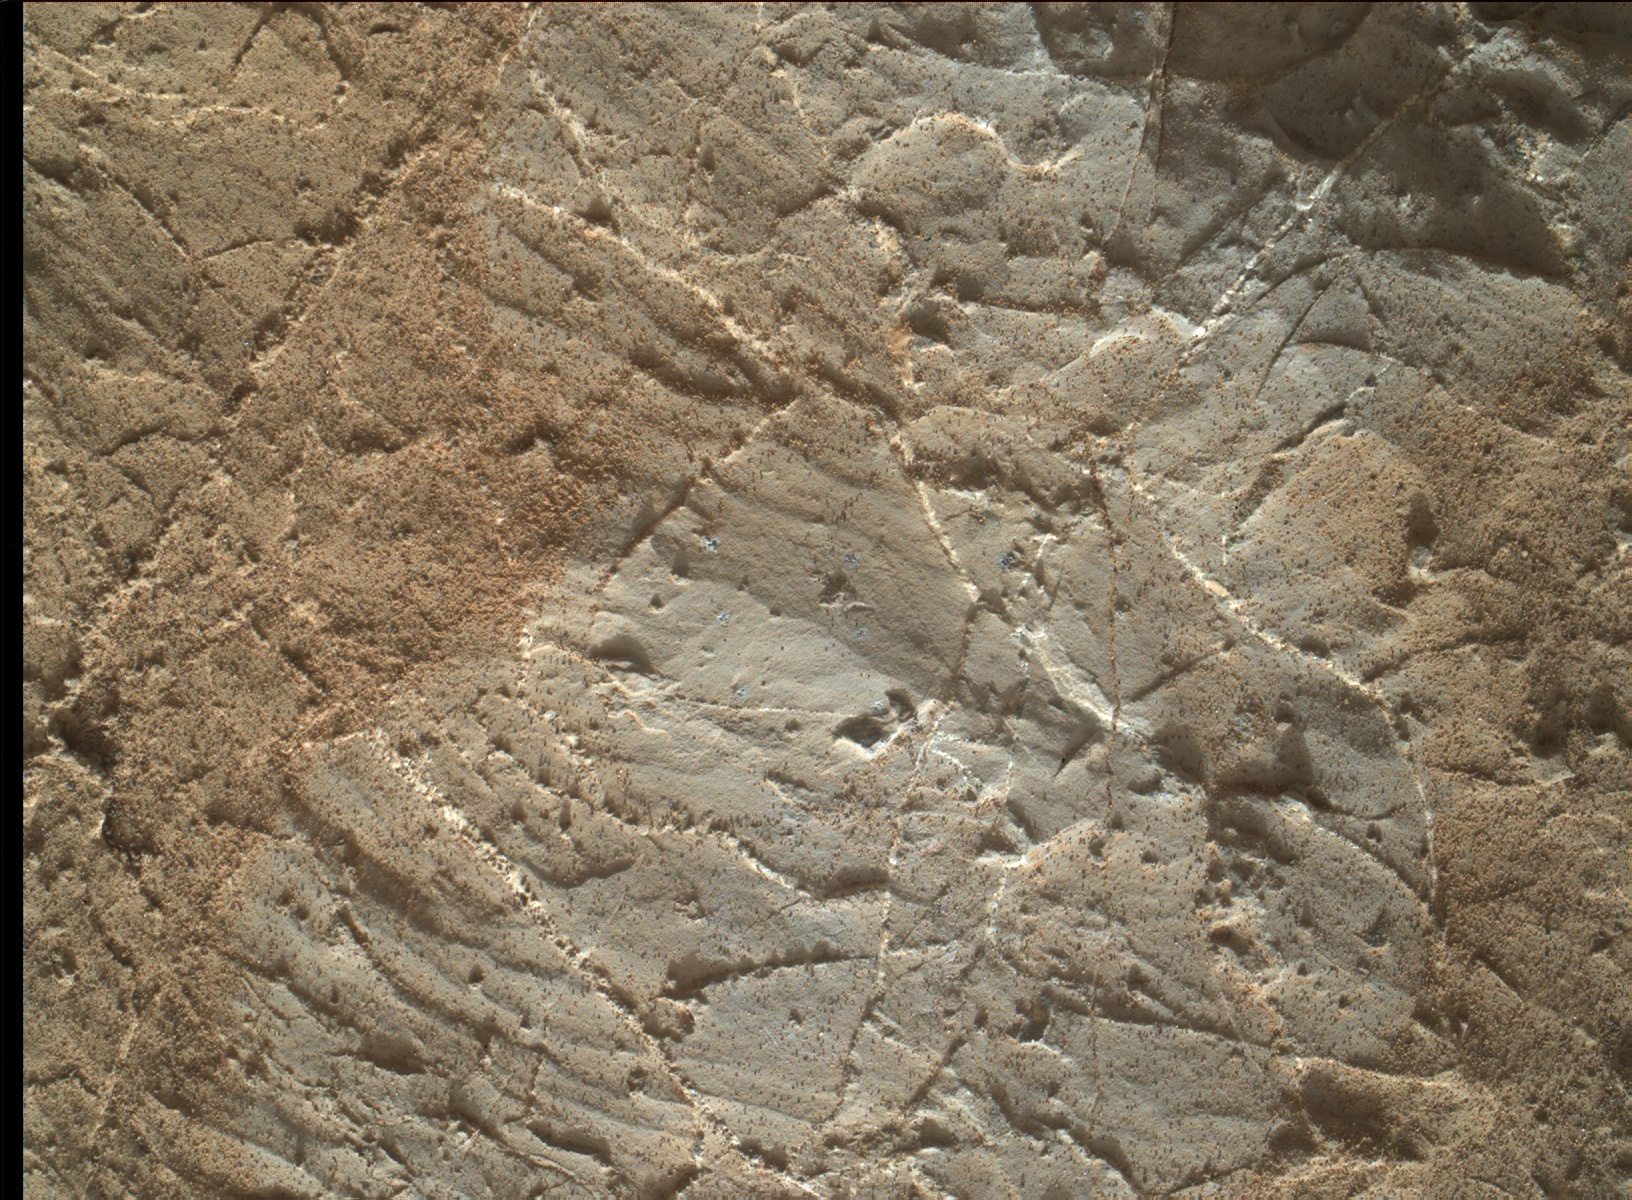 Nasa's Mars rover Curiosity acquired this image using its Mars Hand Lens Imager (MAHLI) on Sol 1974